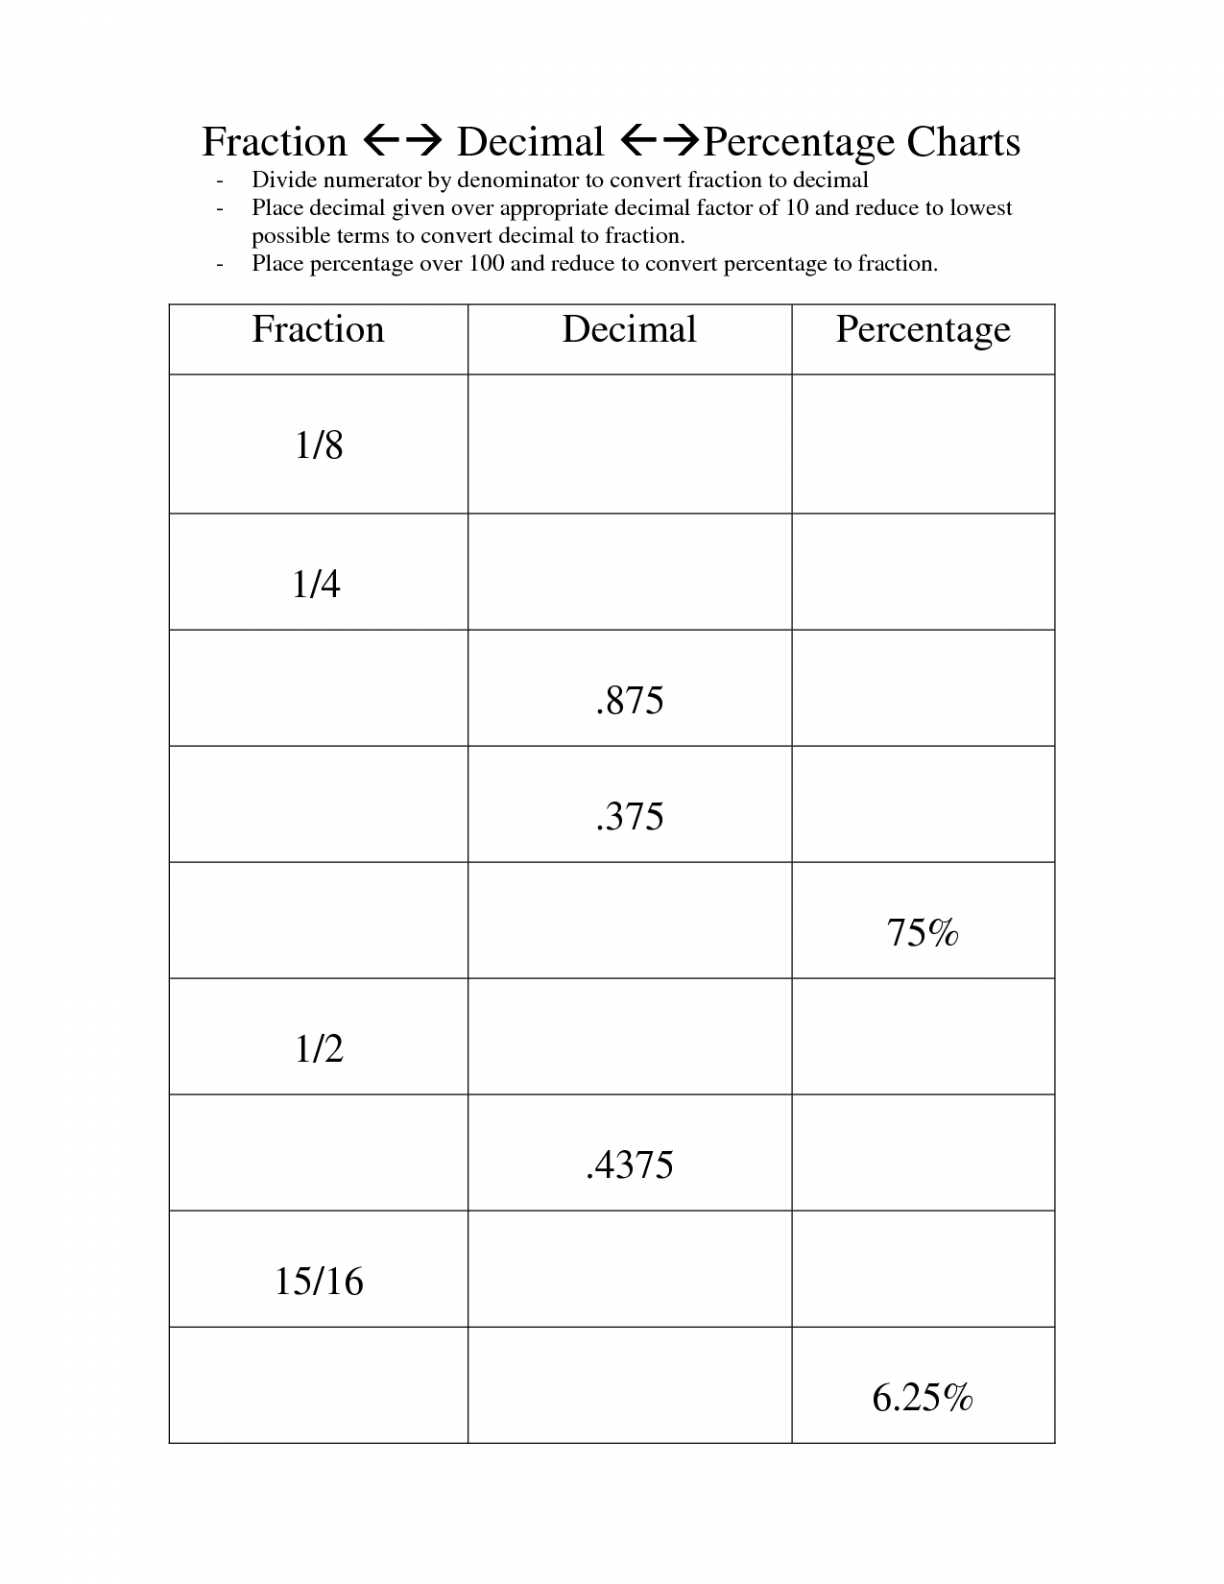 Maths Percentages Worksheets together with Decimals Fractions Decimals and Percents Worksheets 5th Grade 7th